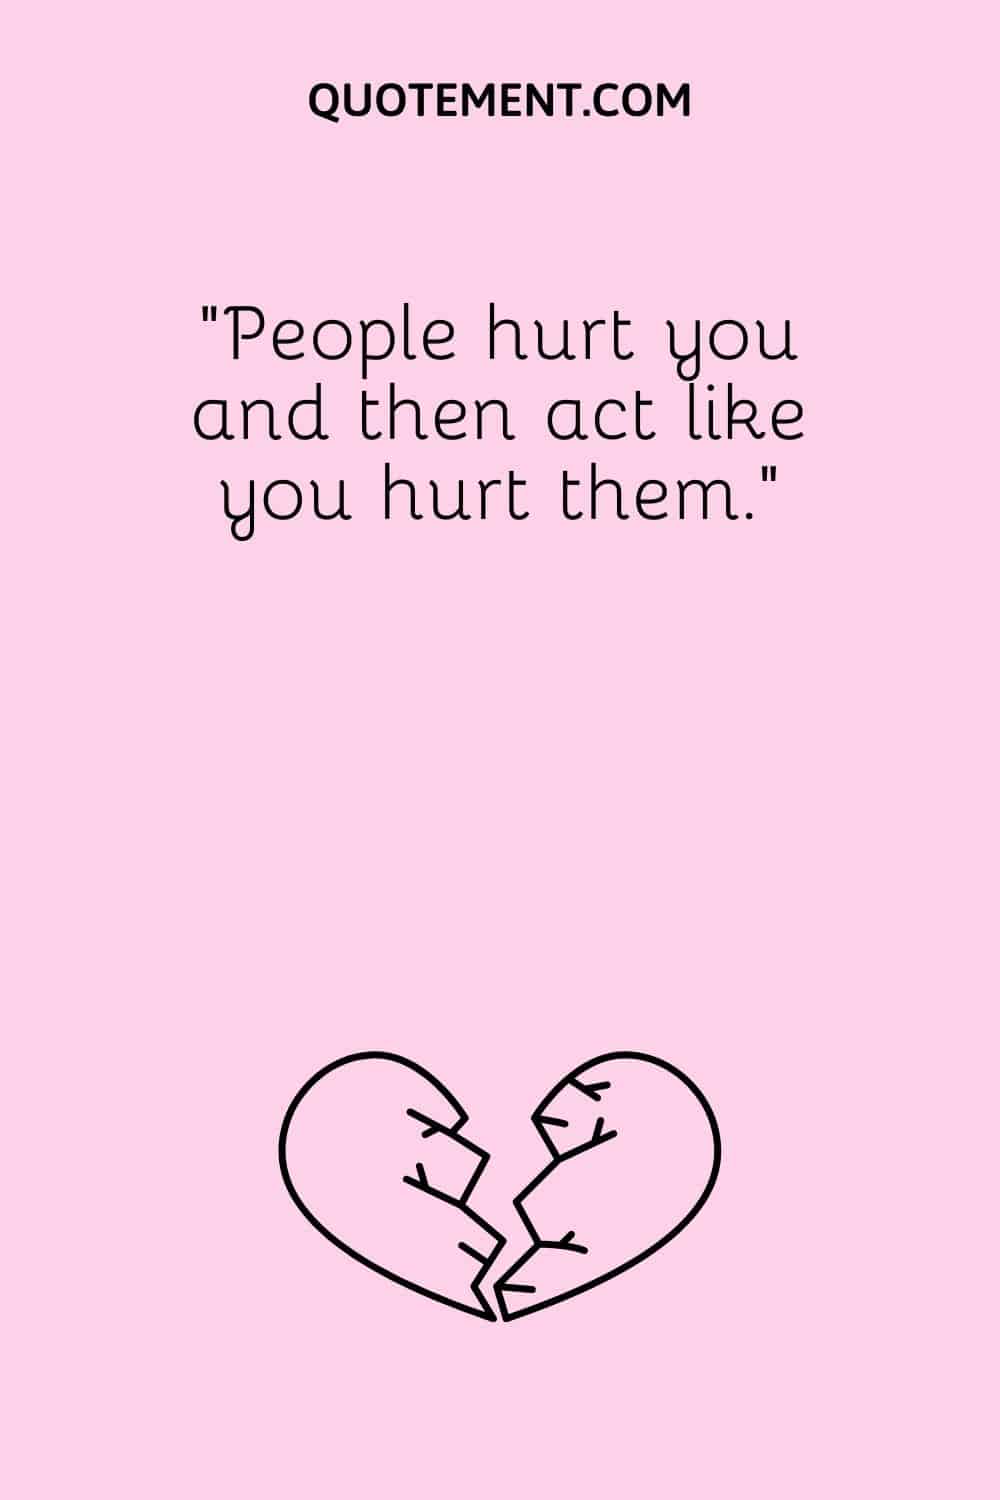 “People hurt you and then act like you hurt them.”